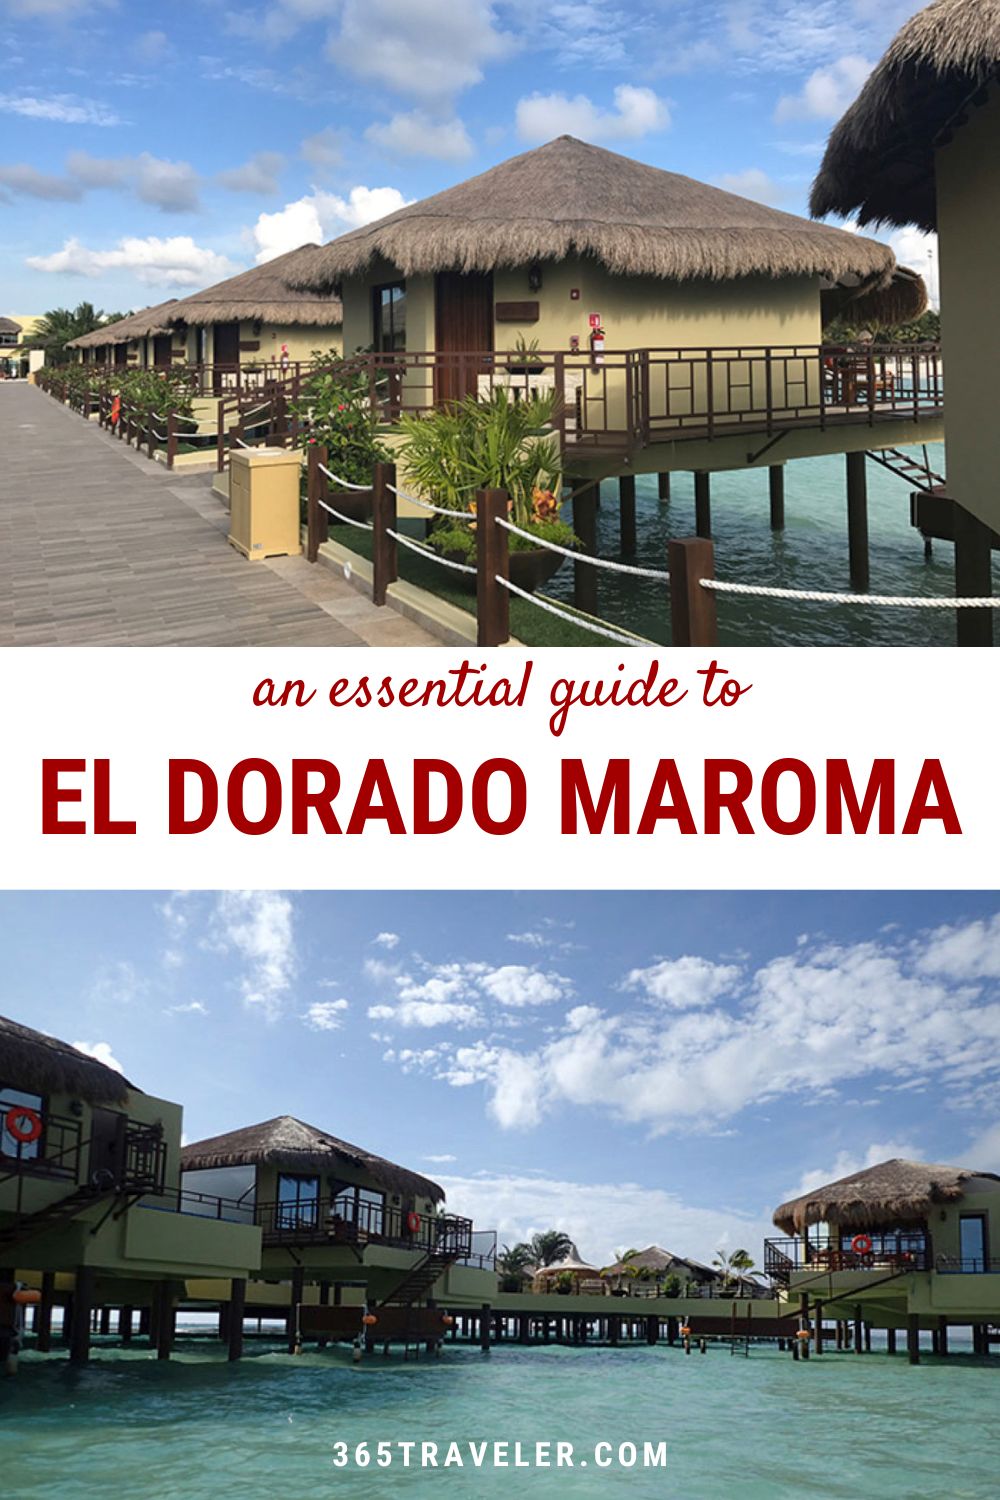 El Dorado Maroma: You’ll Love These Dreamy Overwater Bungalows in Mexico